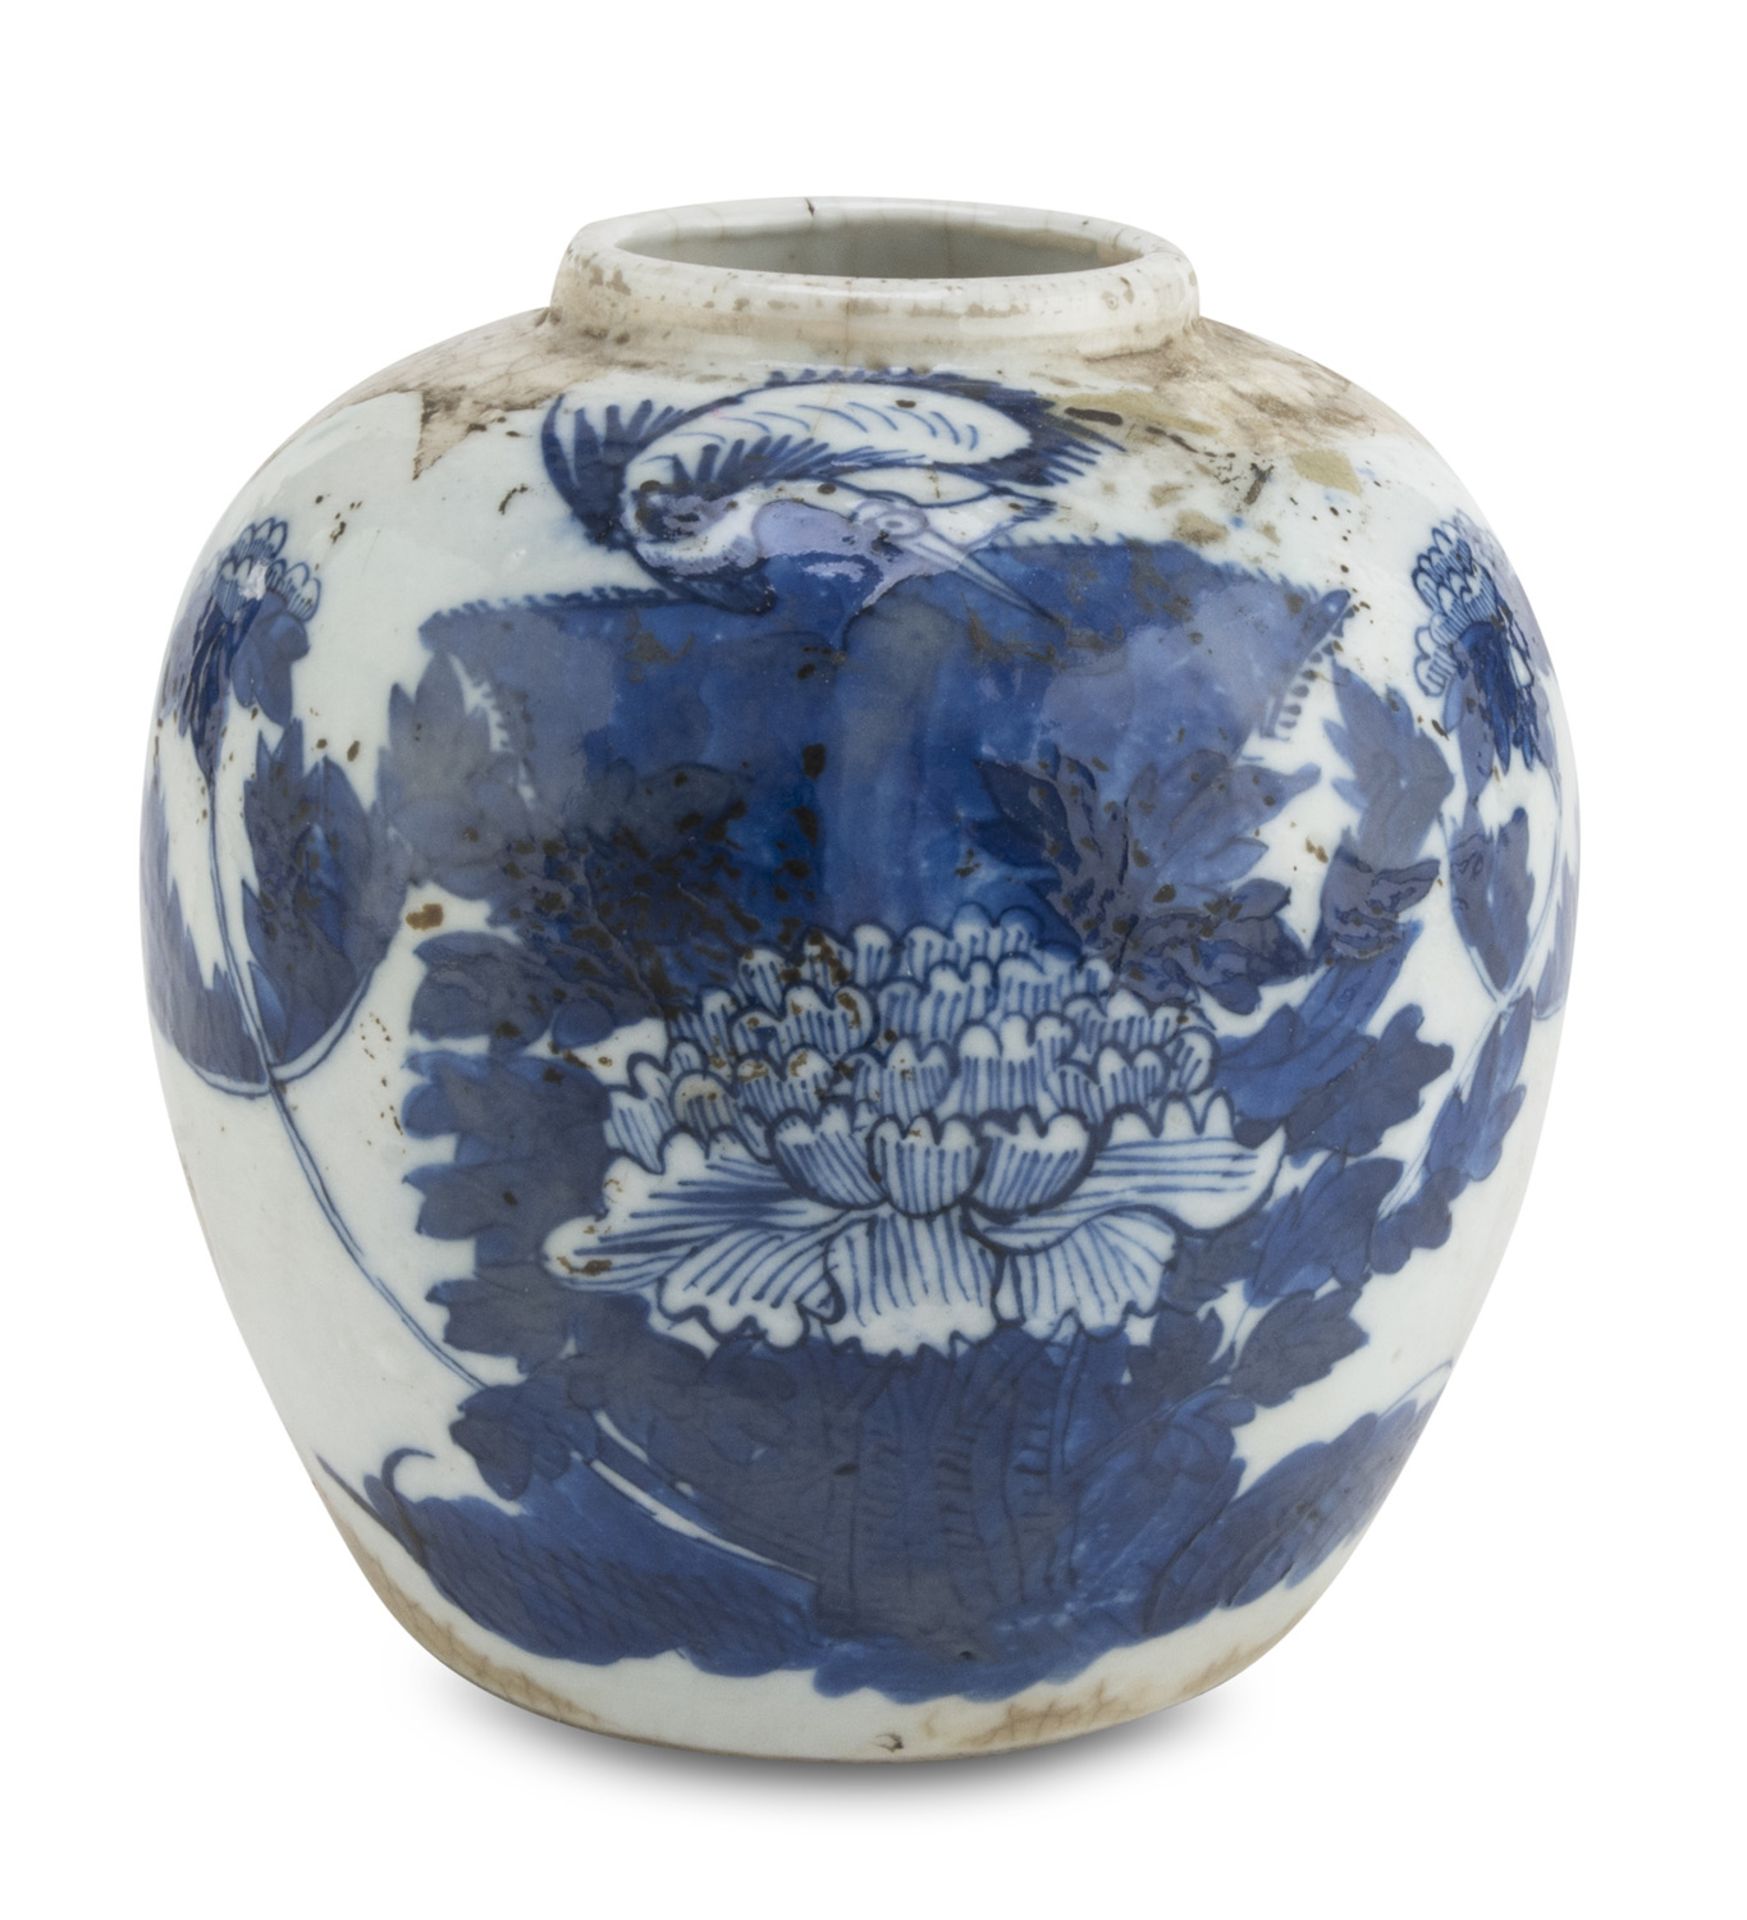 VASE IN WHITE AND BLUE PORCELAIN CHINA LATE 19th EARLY 20th CENTURY